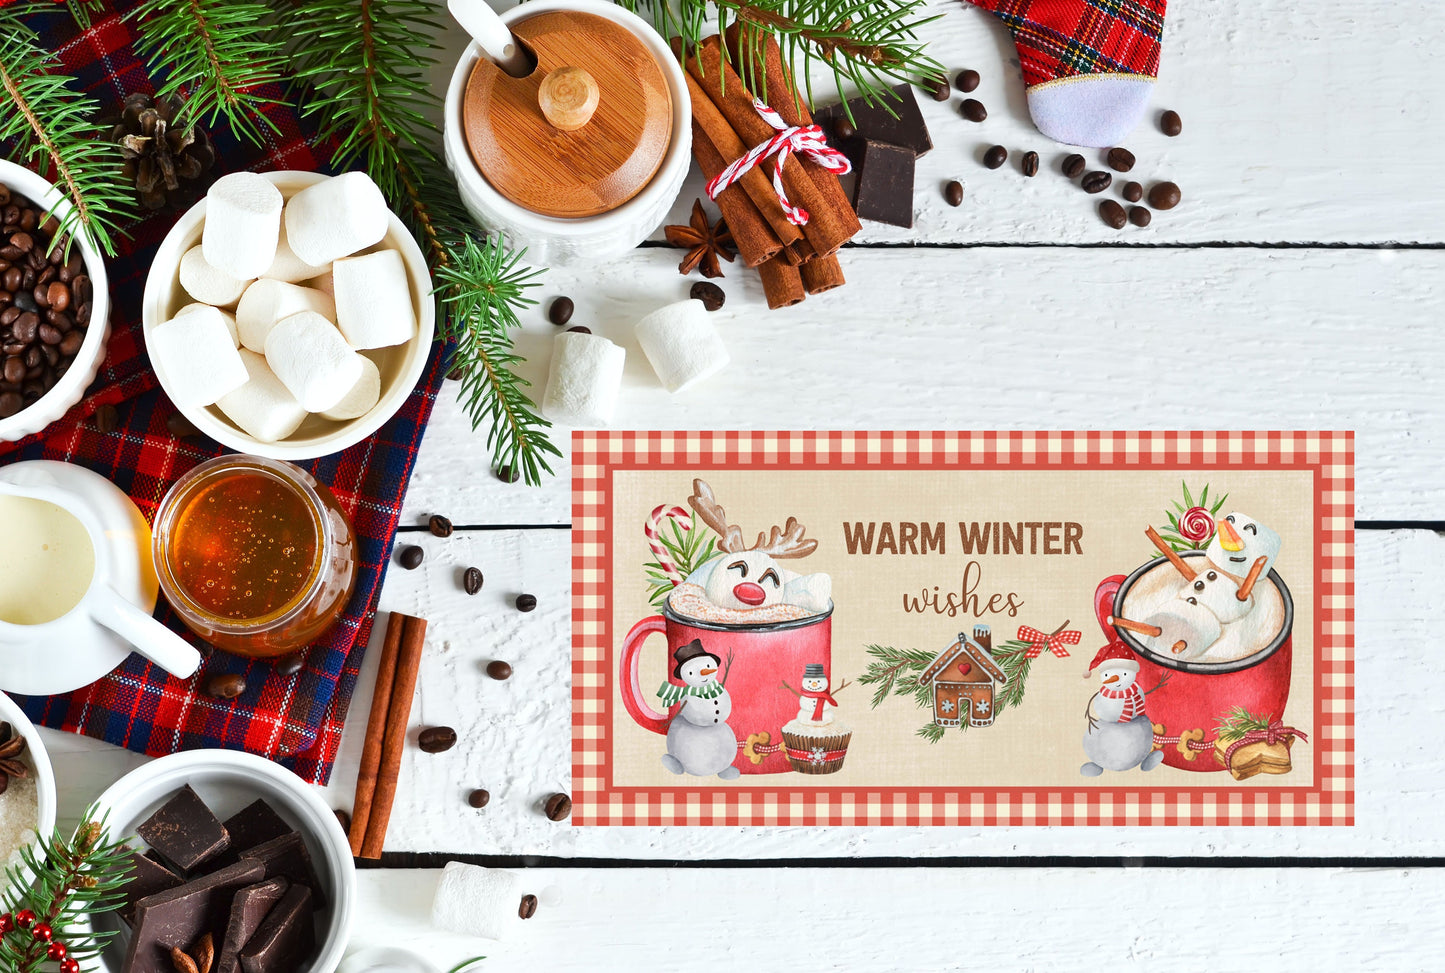 Warm Winter Wishes Hot Cocoa Christmas Printed Handmade Wood Sign (10" x 5")